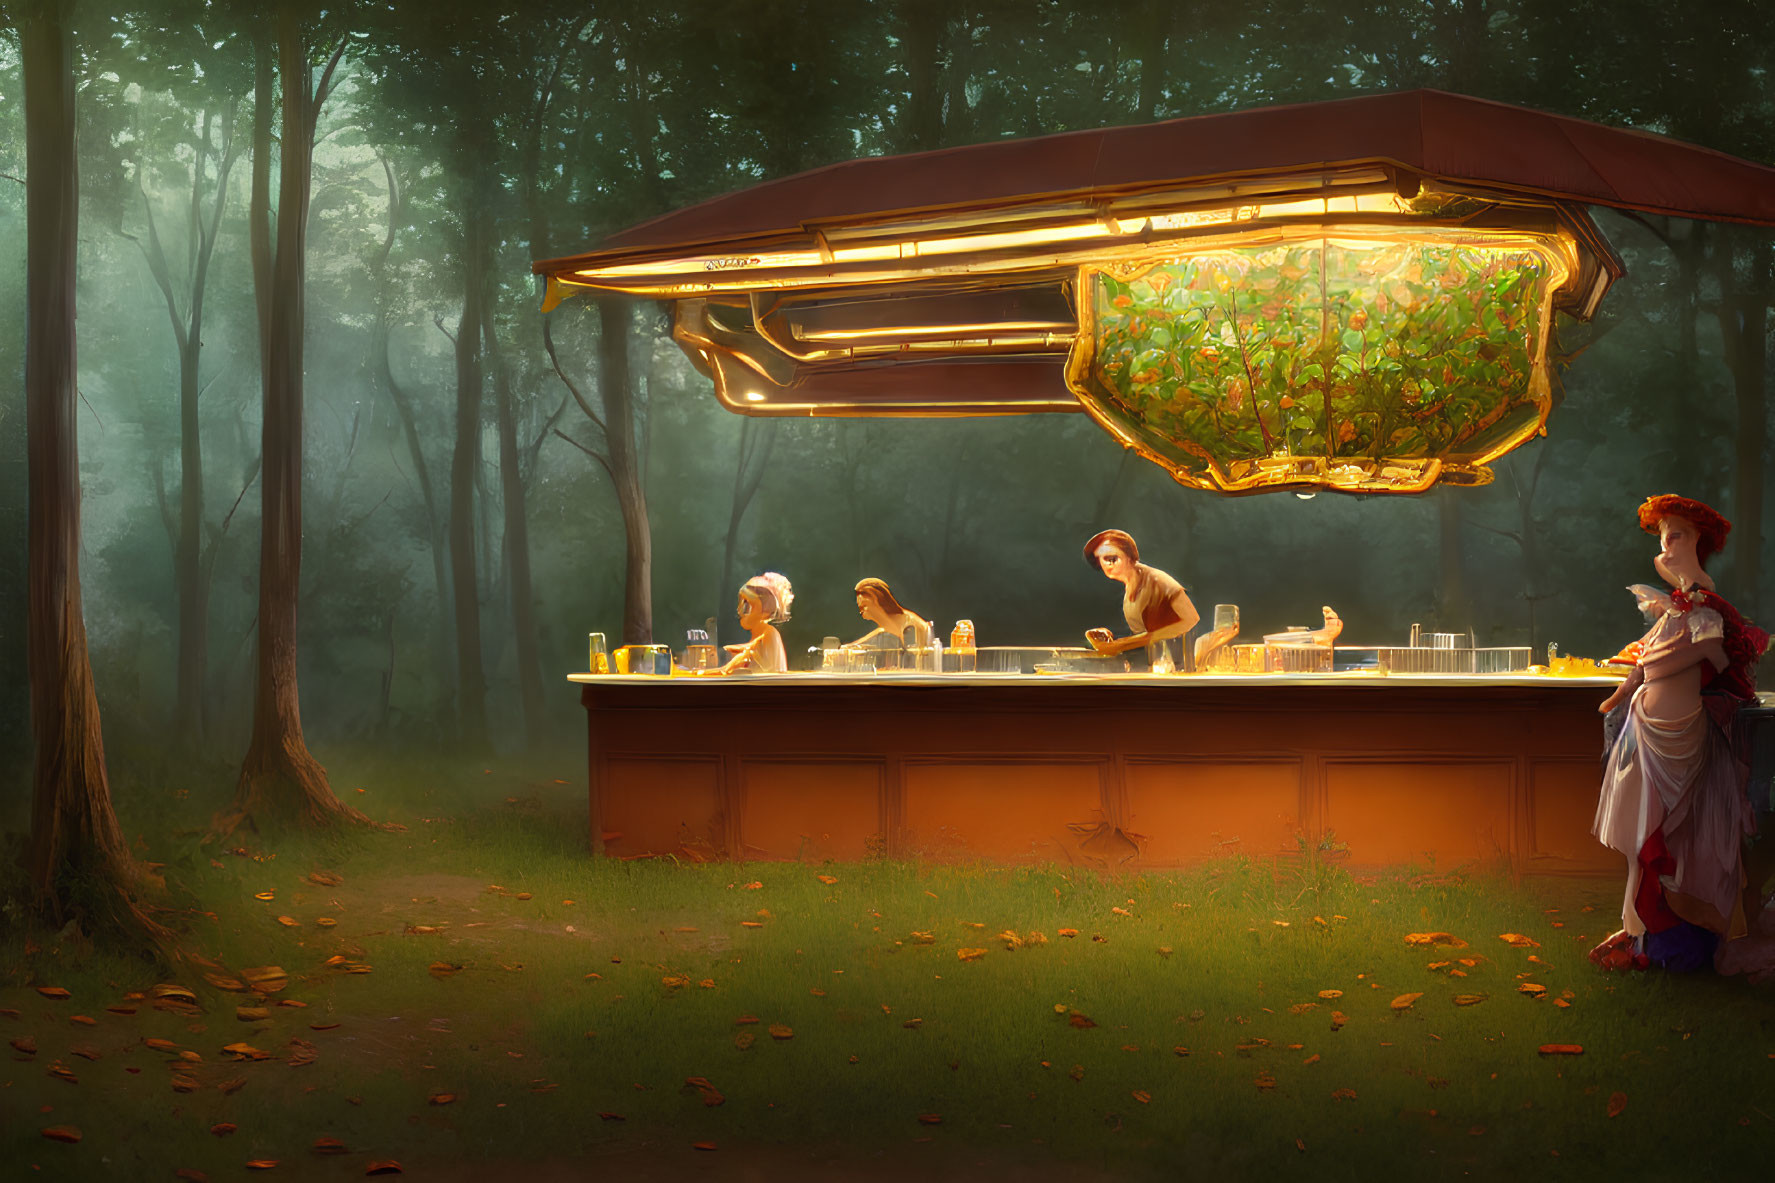 Futuristic outdoor bar in forest clearing with female bartender under warm light